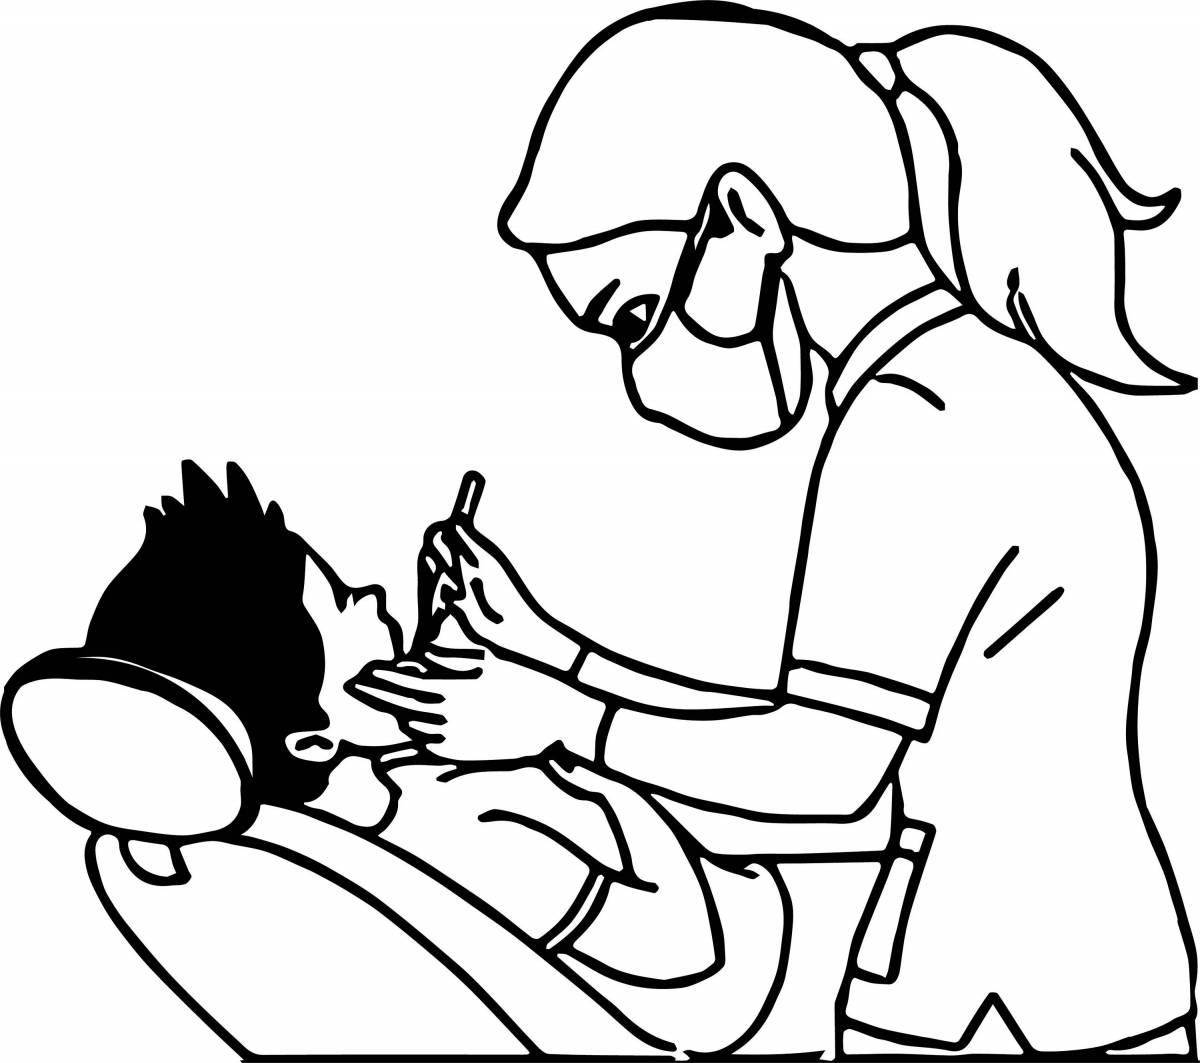 Colorful dentist coloring page